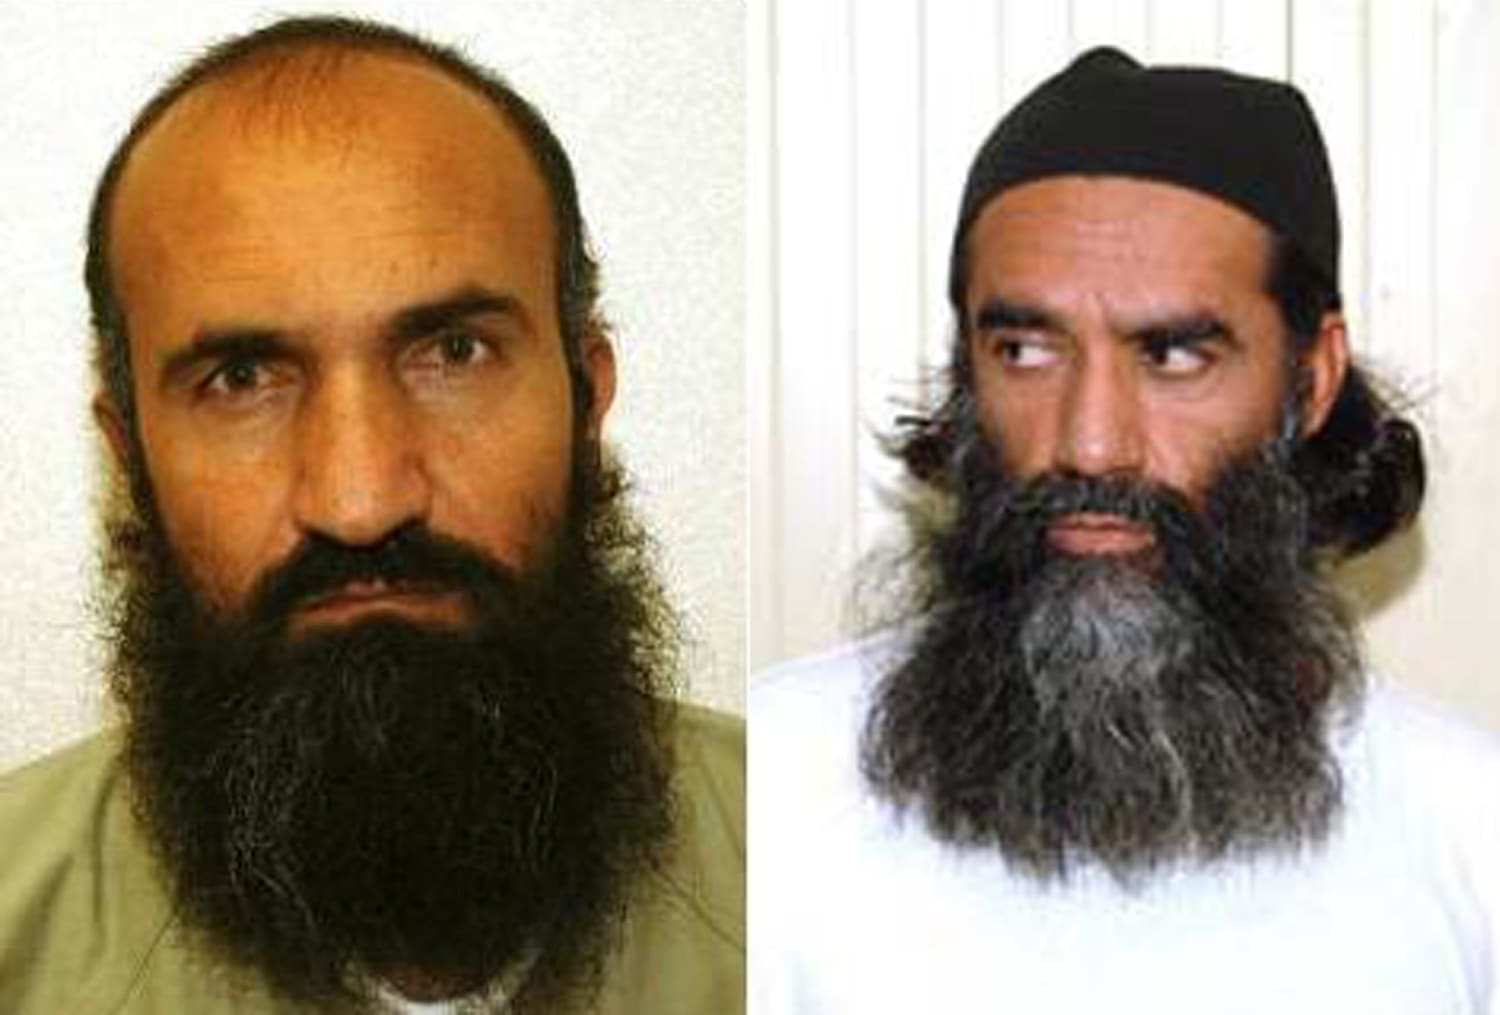 Who Are the 5 Guantanamo Detainees Swapped in Exchange for Bergdahl?